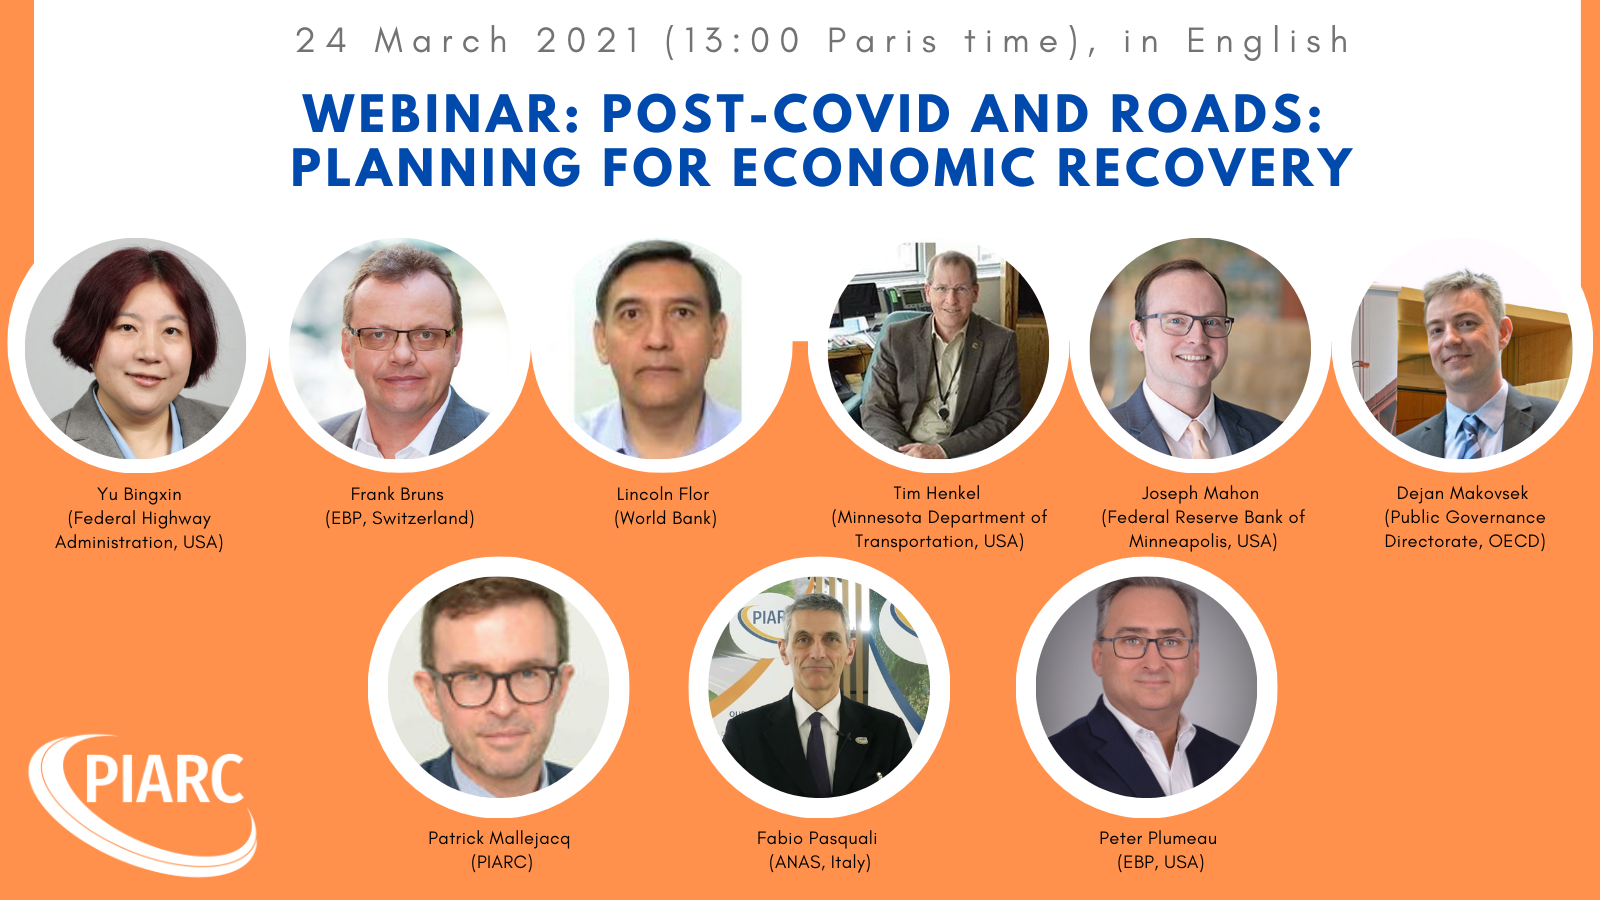 Prepare for the economic recovery in the post-Covid world with PIARC’s next
webinar!